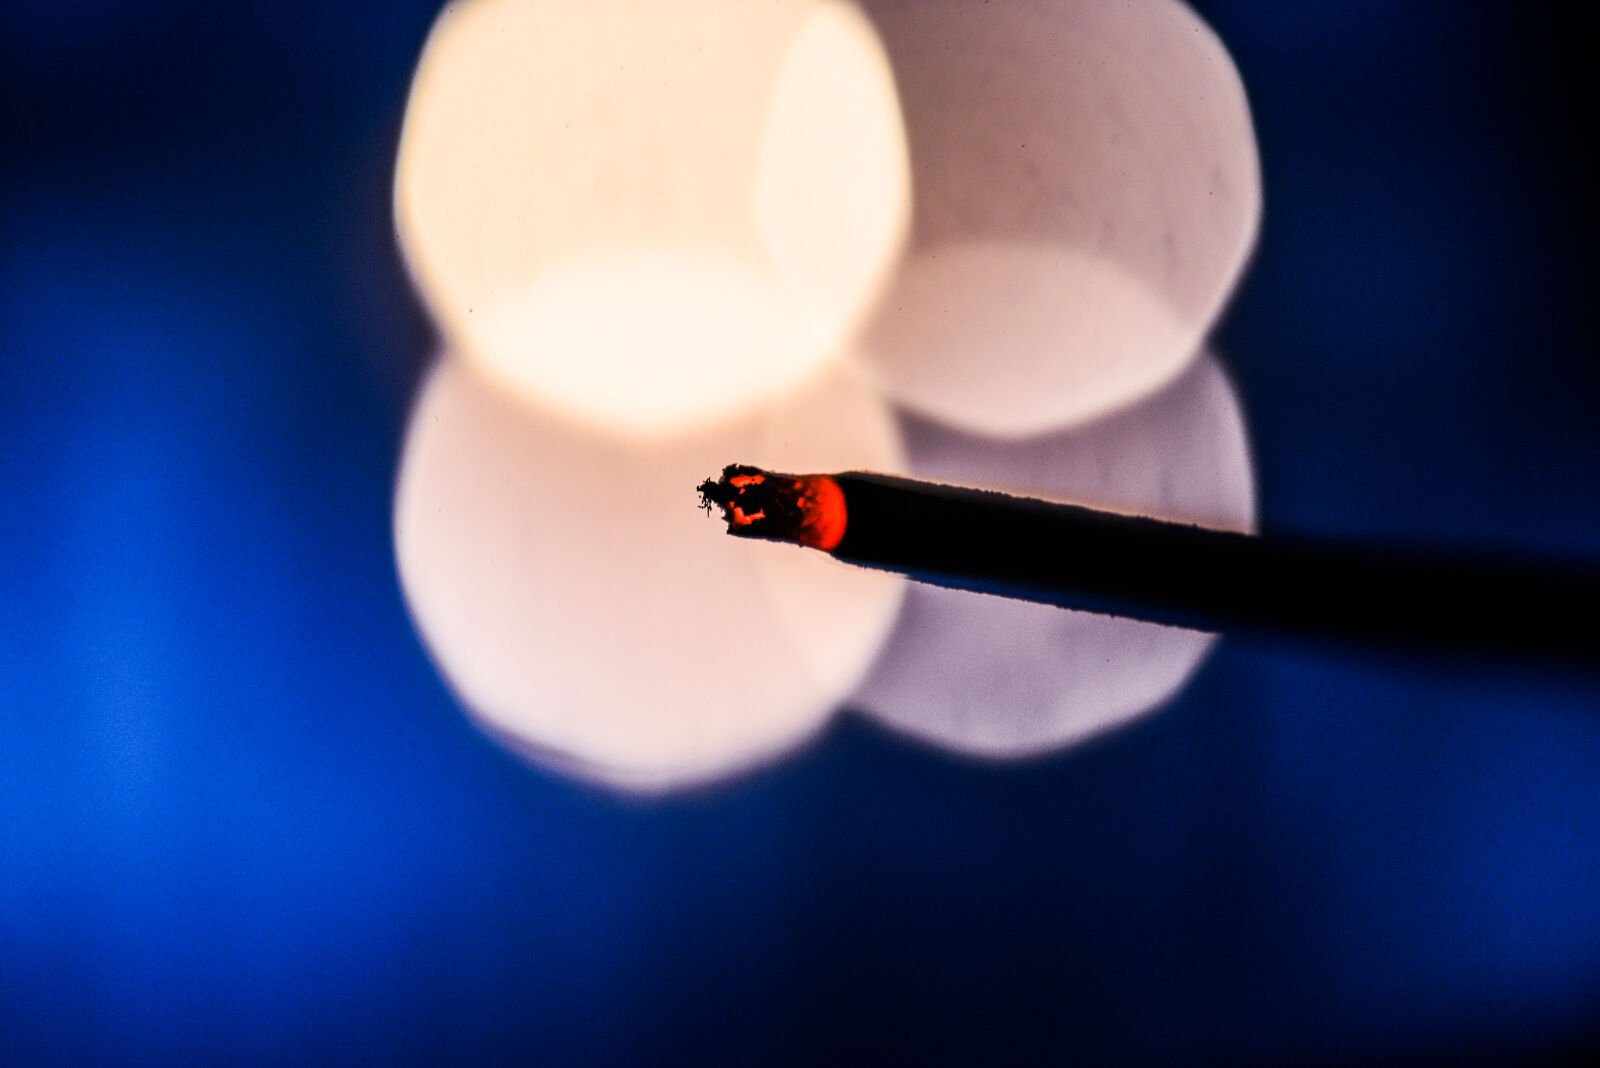 Nikon D600 sample photo. Lighted, cigarette, stick, with photography